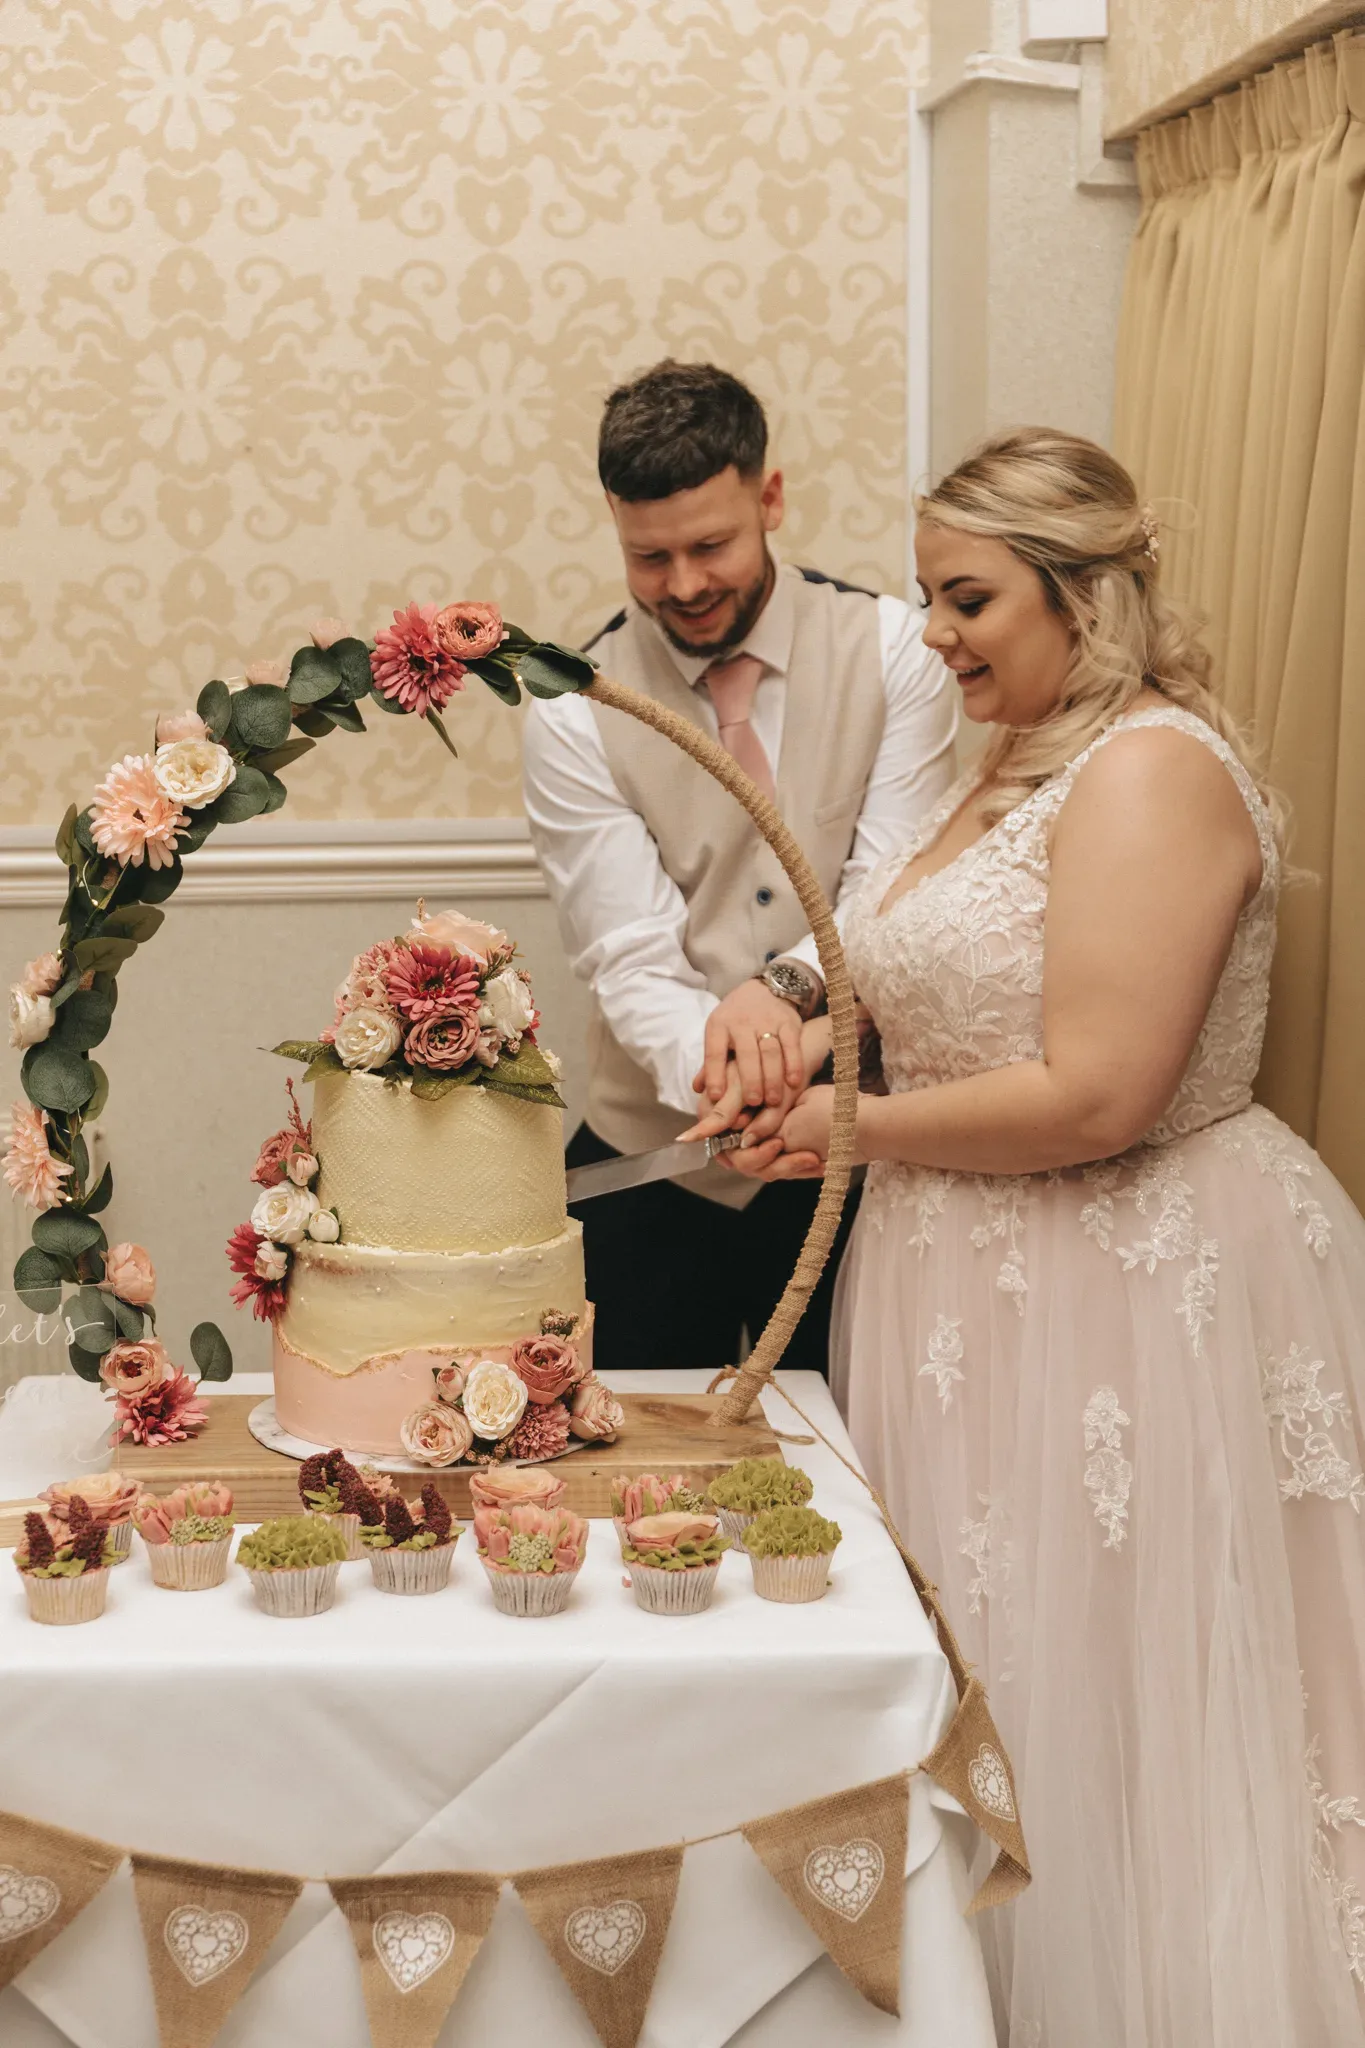 A bride and groom are cutting a three-tier wedding cake adorned with pink flowers, surrounded by cupcakes, under a floral arch, inside a warmly lit room with elegant wallpaper.